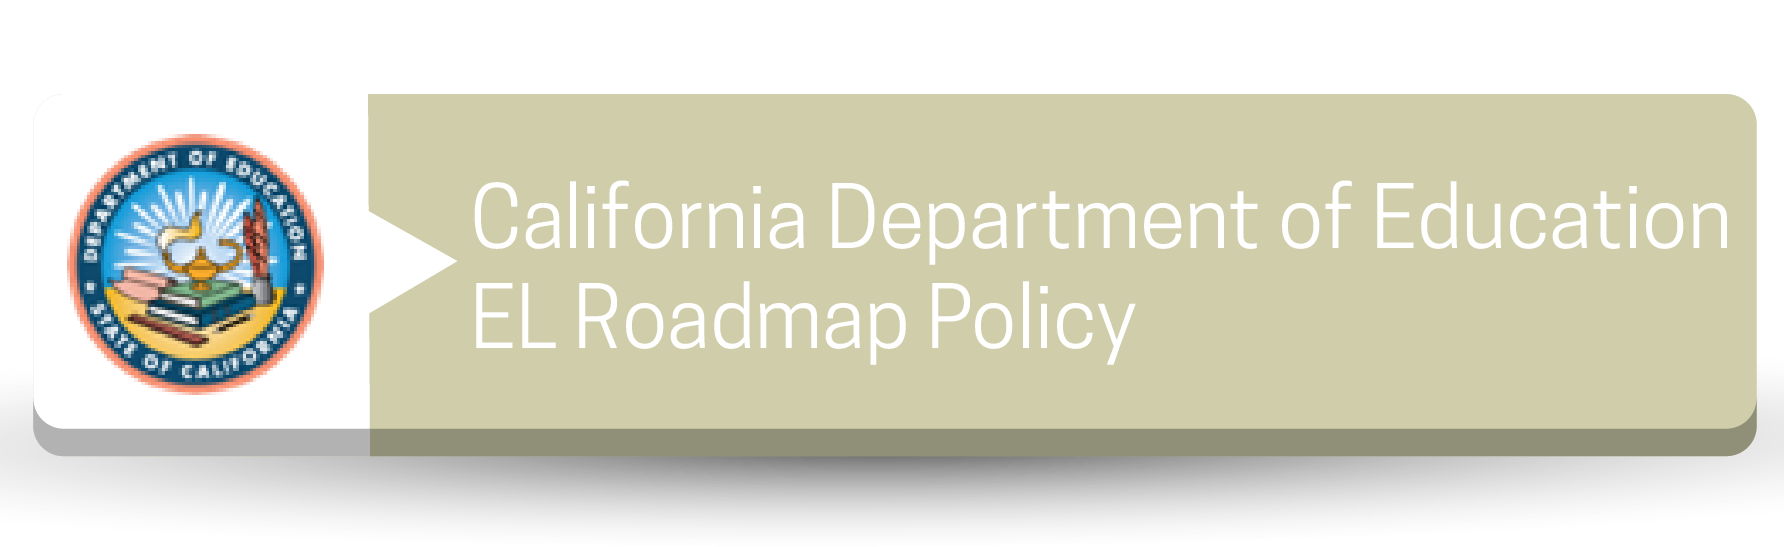 California Department of Education EL Roadmap Policy Button